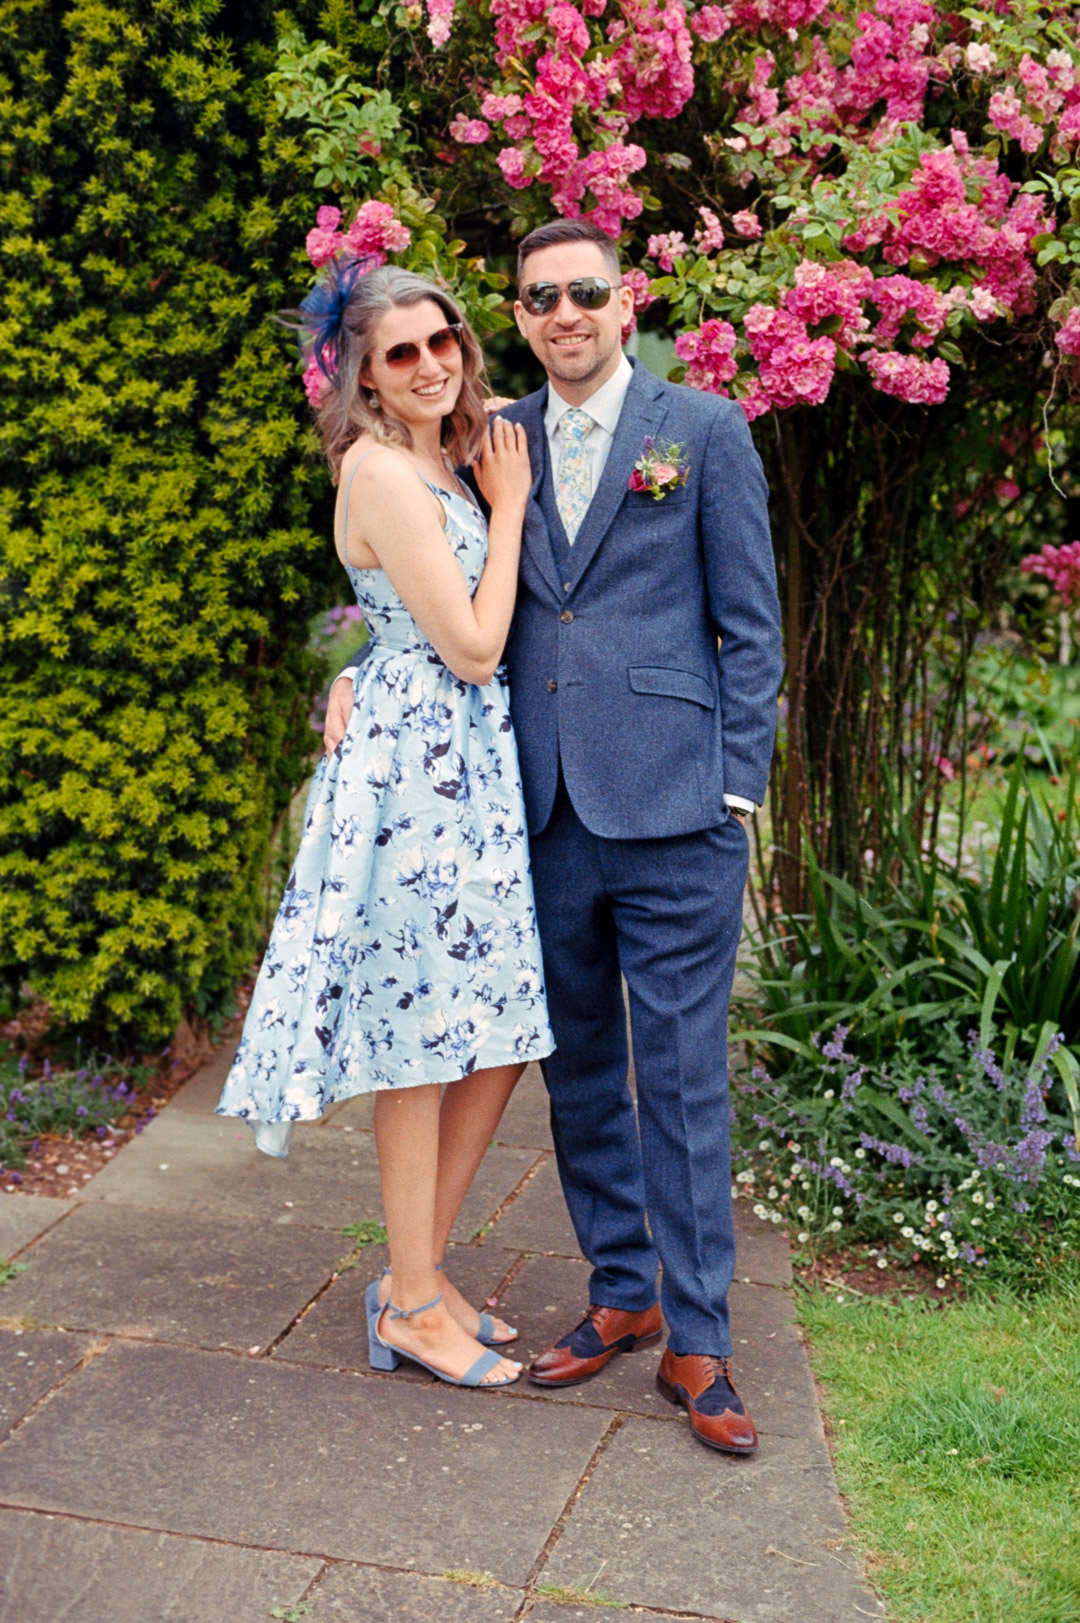 young couple holding hands stood under large rose bush during day time